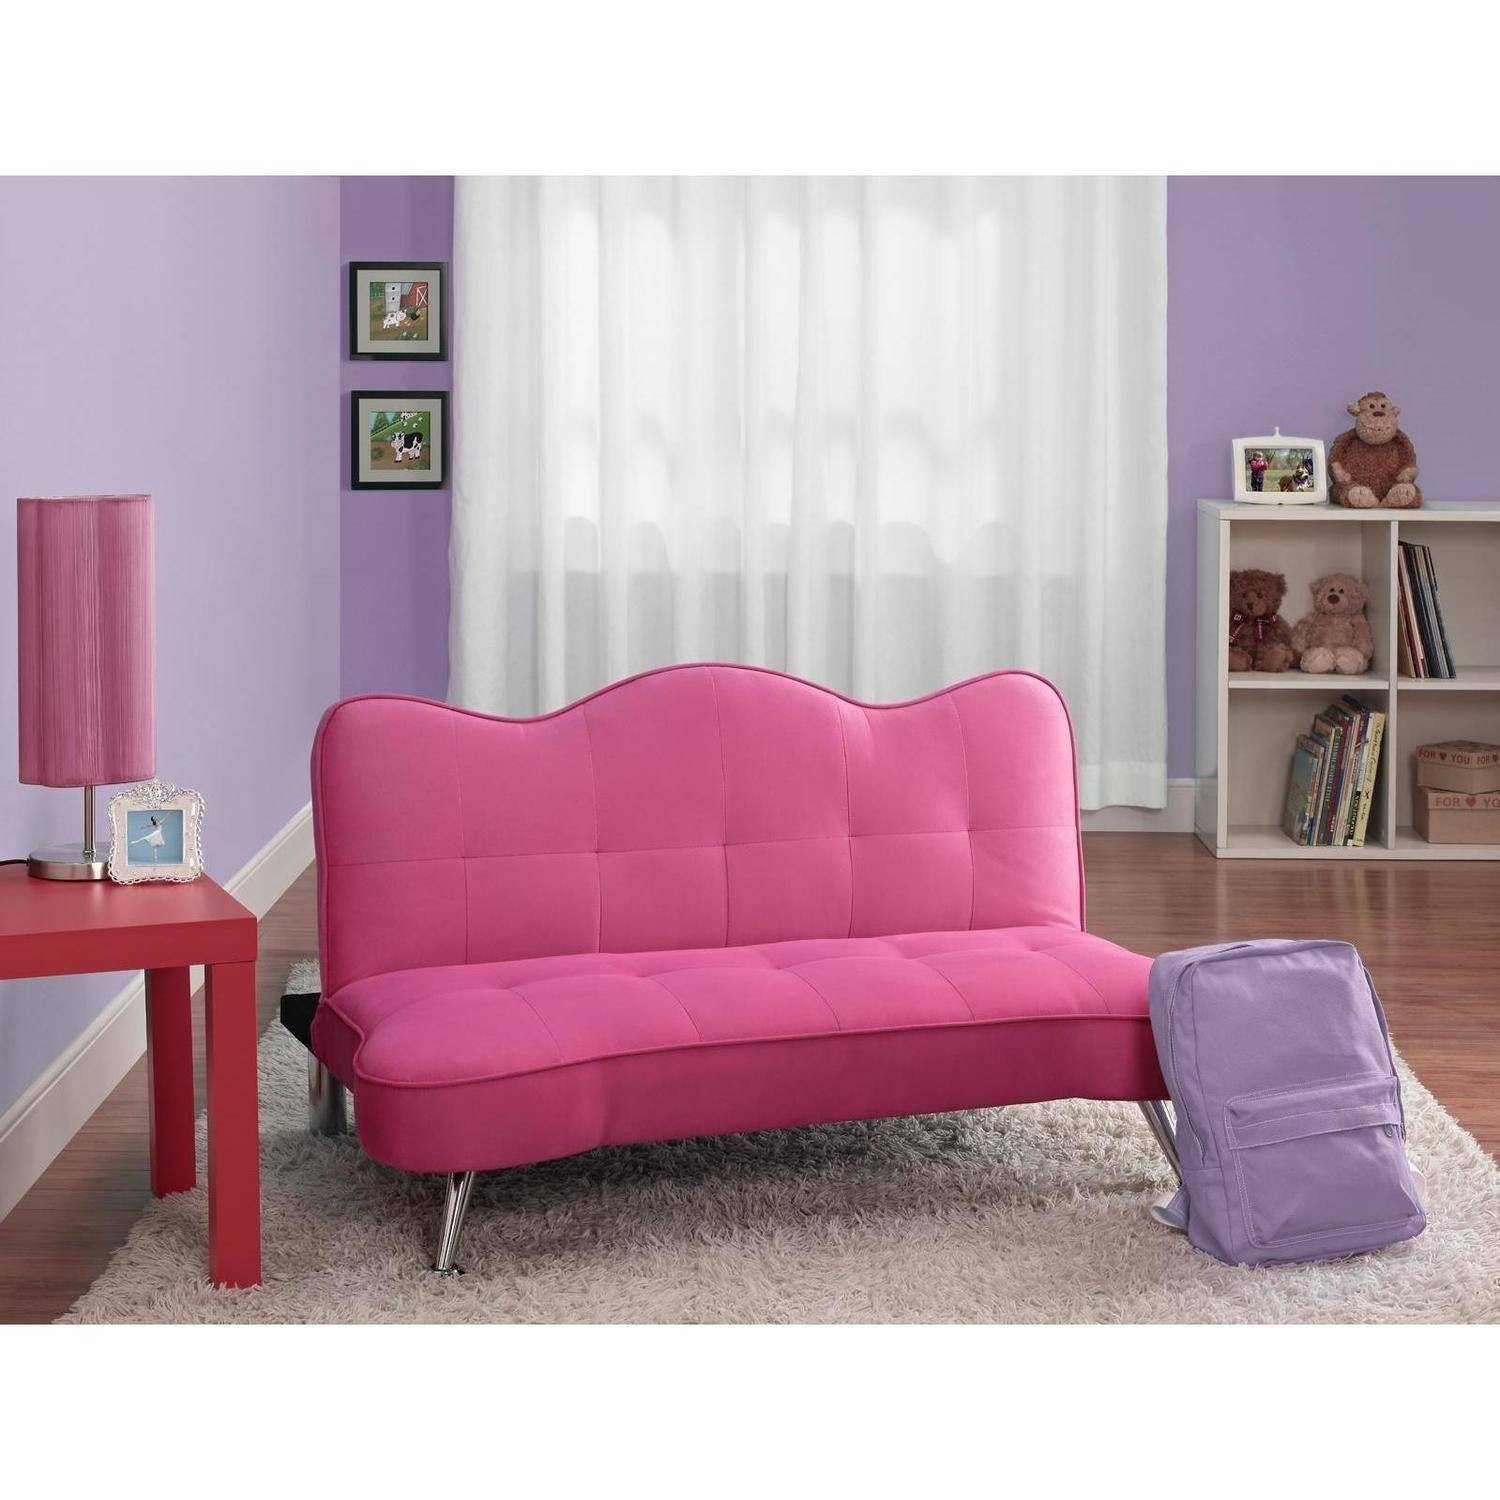 MyLayabout Kids MEMORY FOAM Z Bed/Fold Out guest Bed Sofabed/Chair/FutonPink 